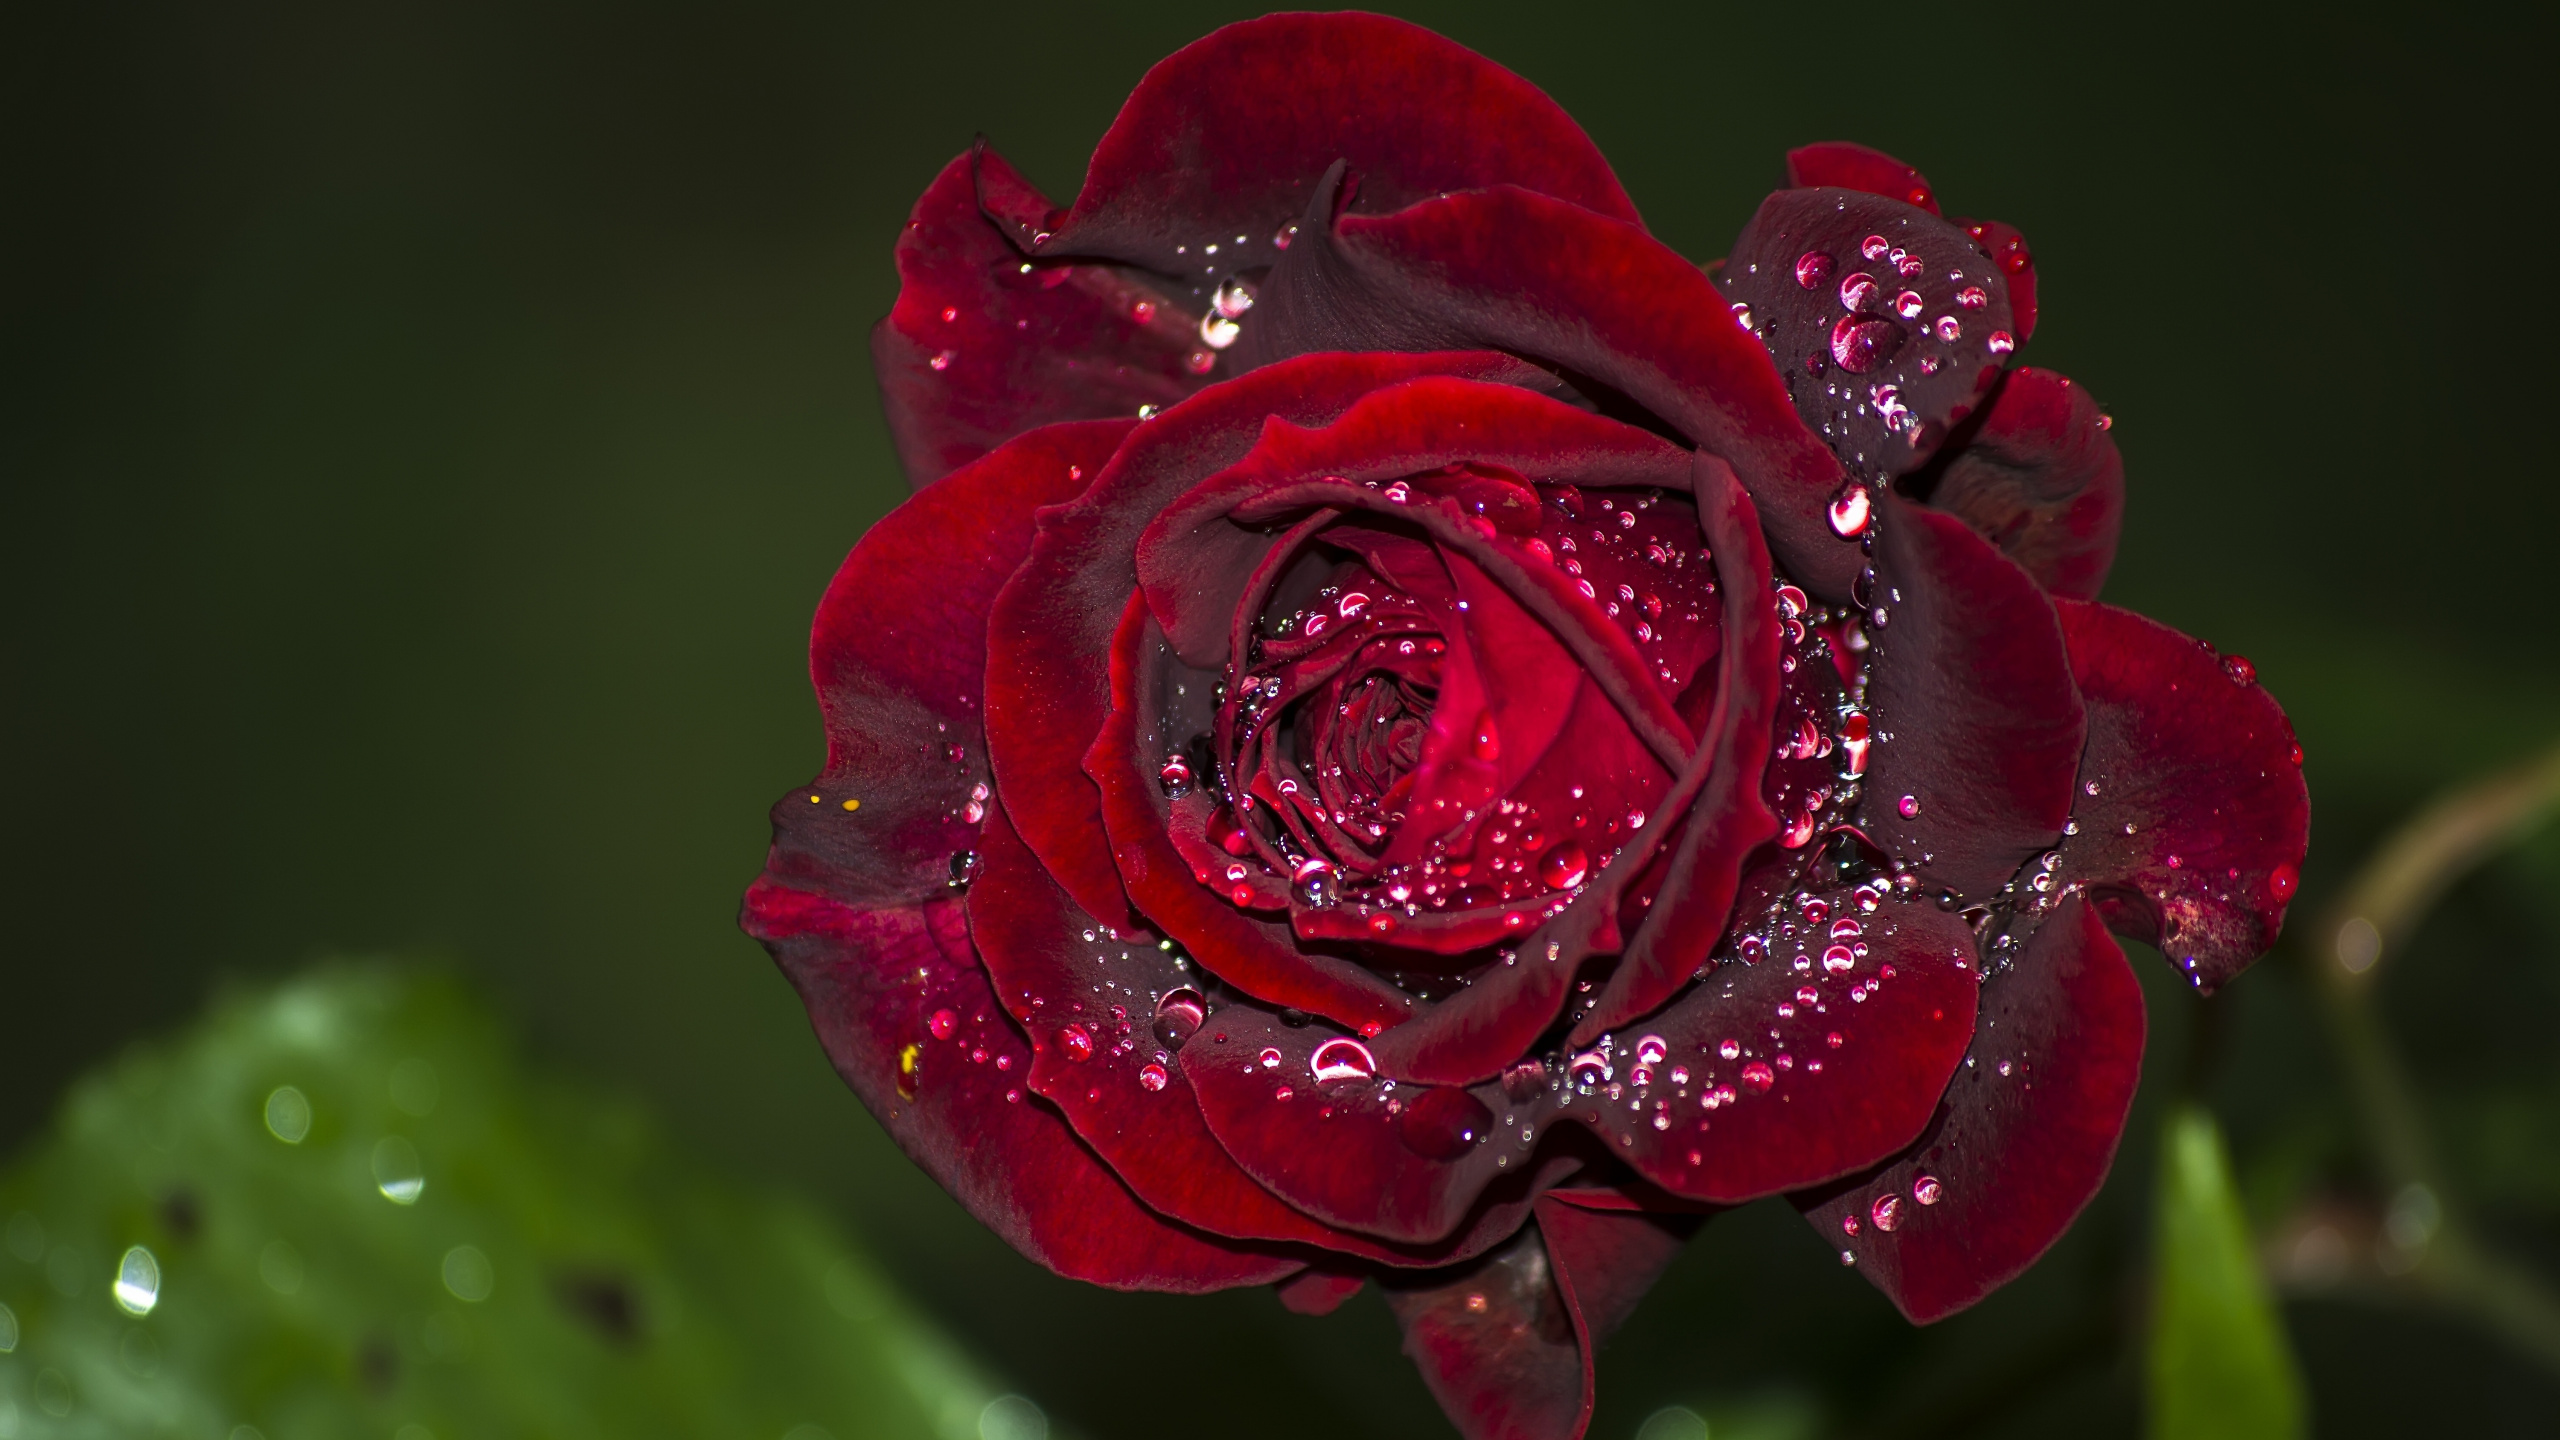 Red Rose in Bloom With Dew Drops. Wallpaper in 2560x1440 Resolution